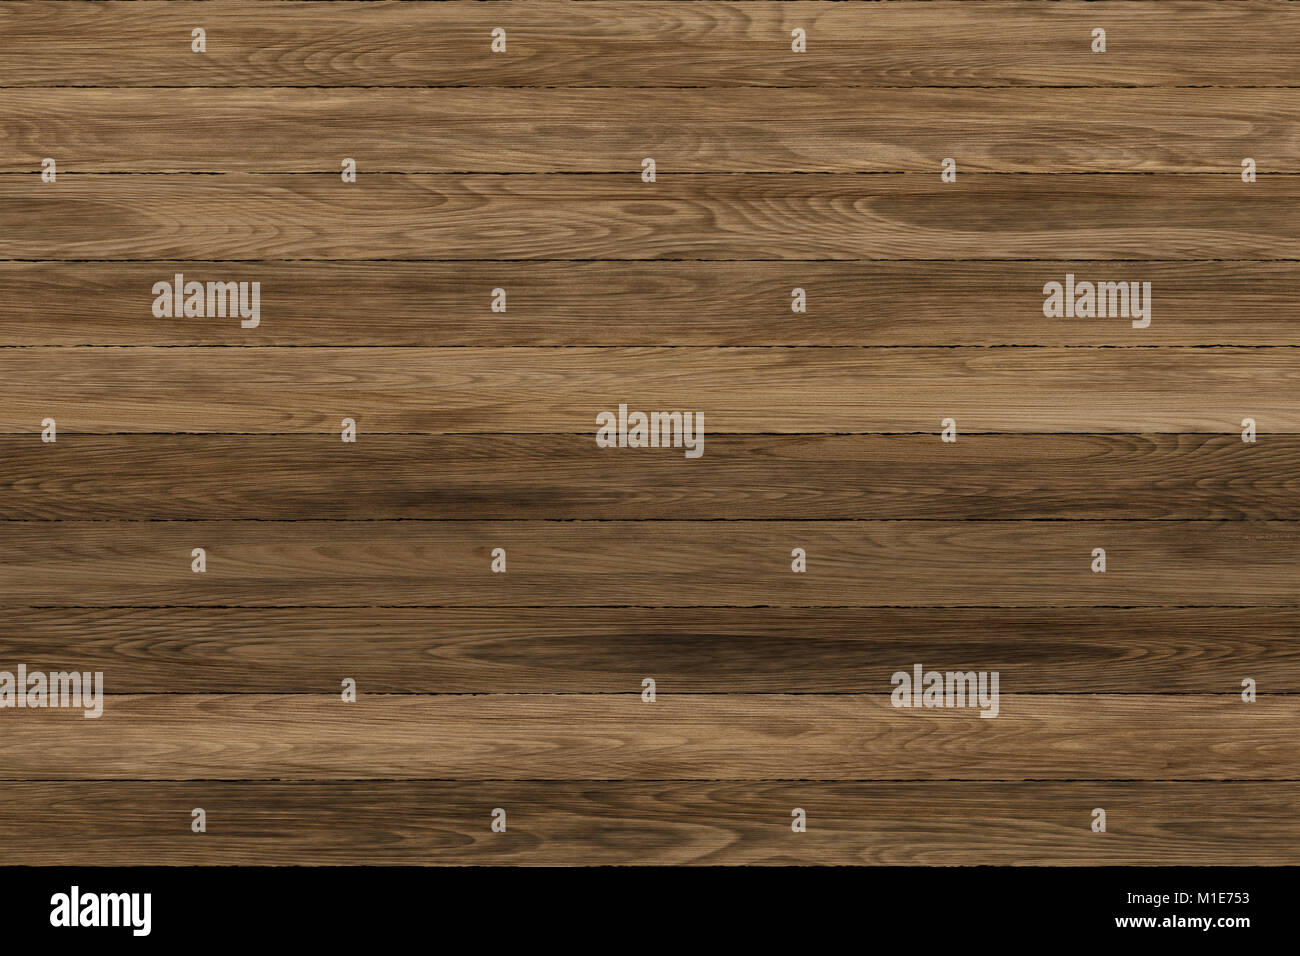 Grunge wood panels. Planks Background. Old wall wooden vintage floor Stock Photo